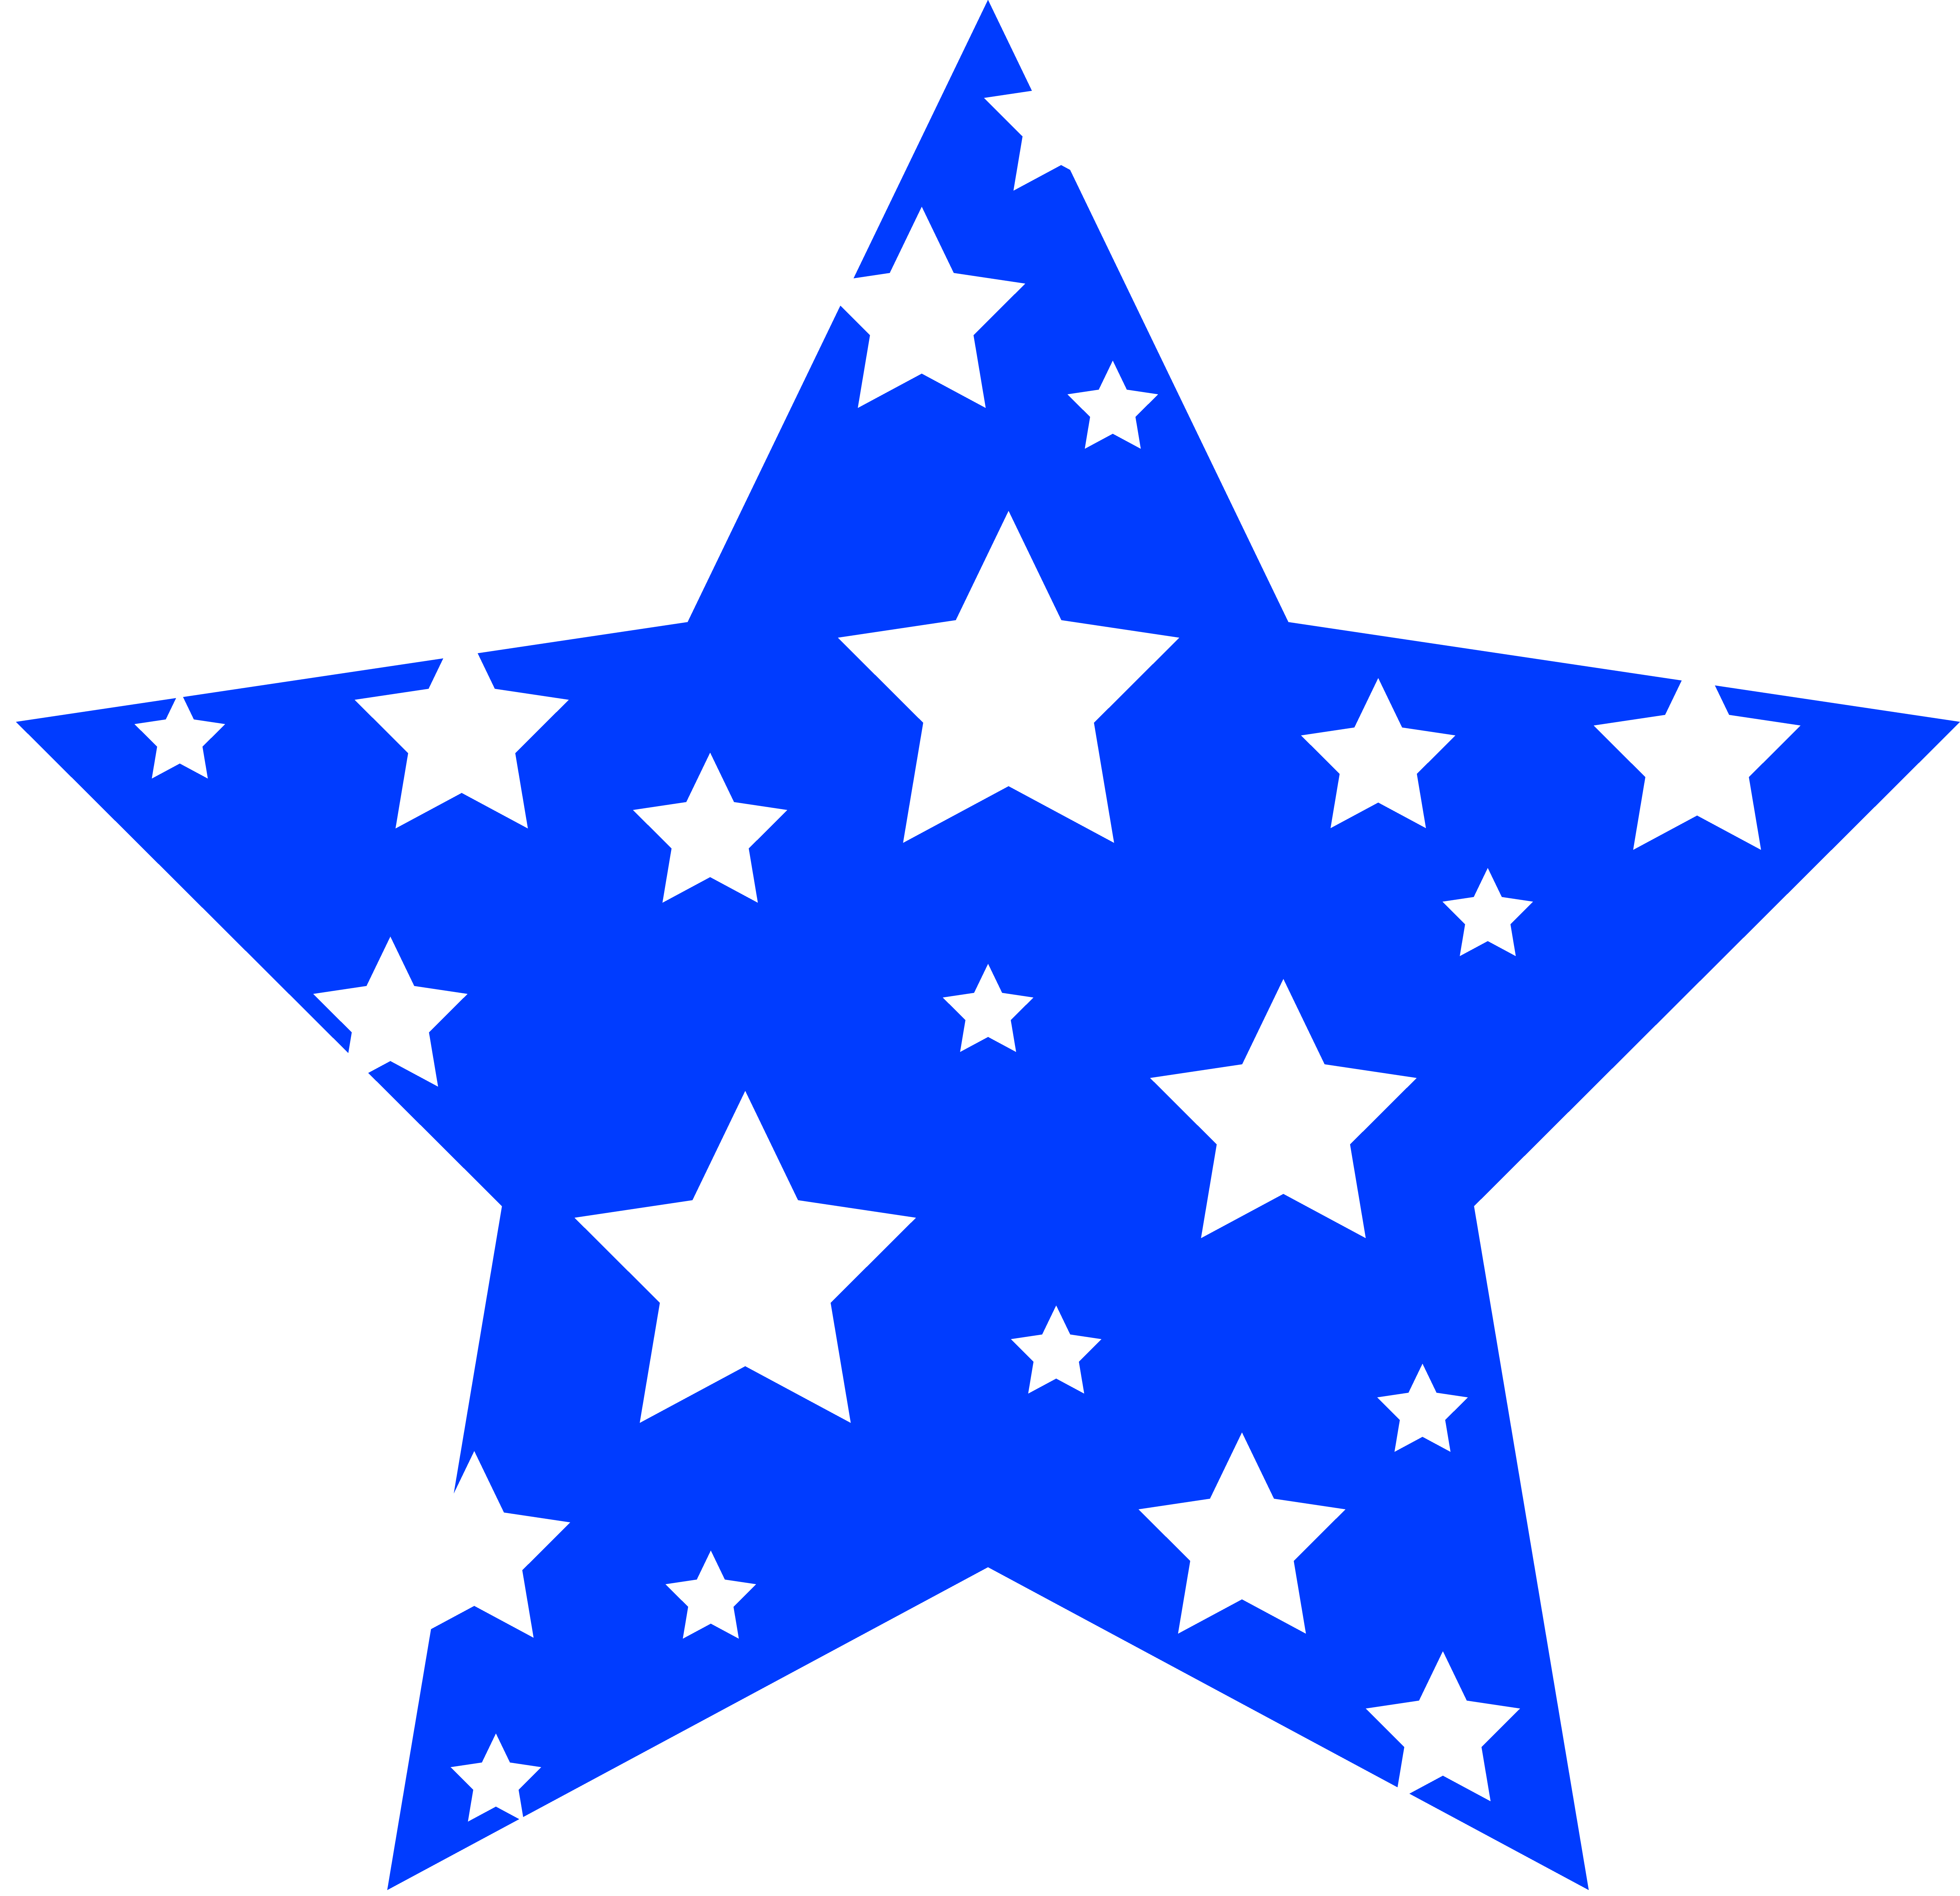 Blue Star Patterned With White - Free Clipart Images